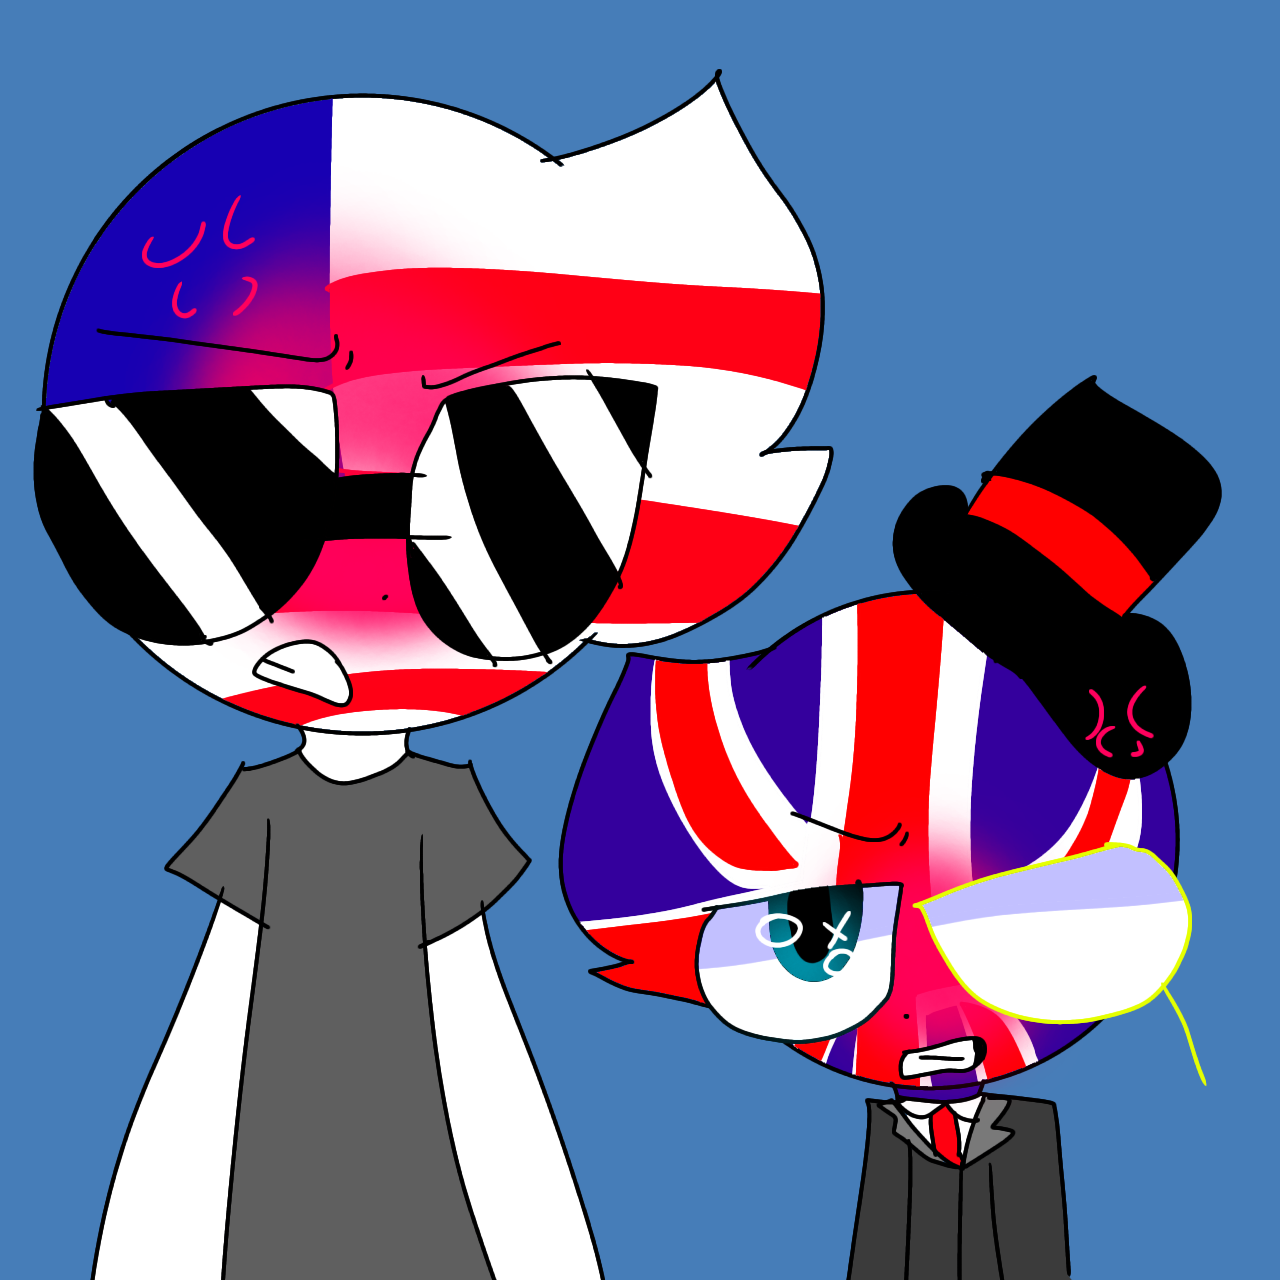 British and American angry meme template by Kittybuttu on DeviantArt